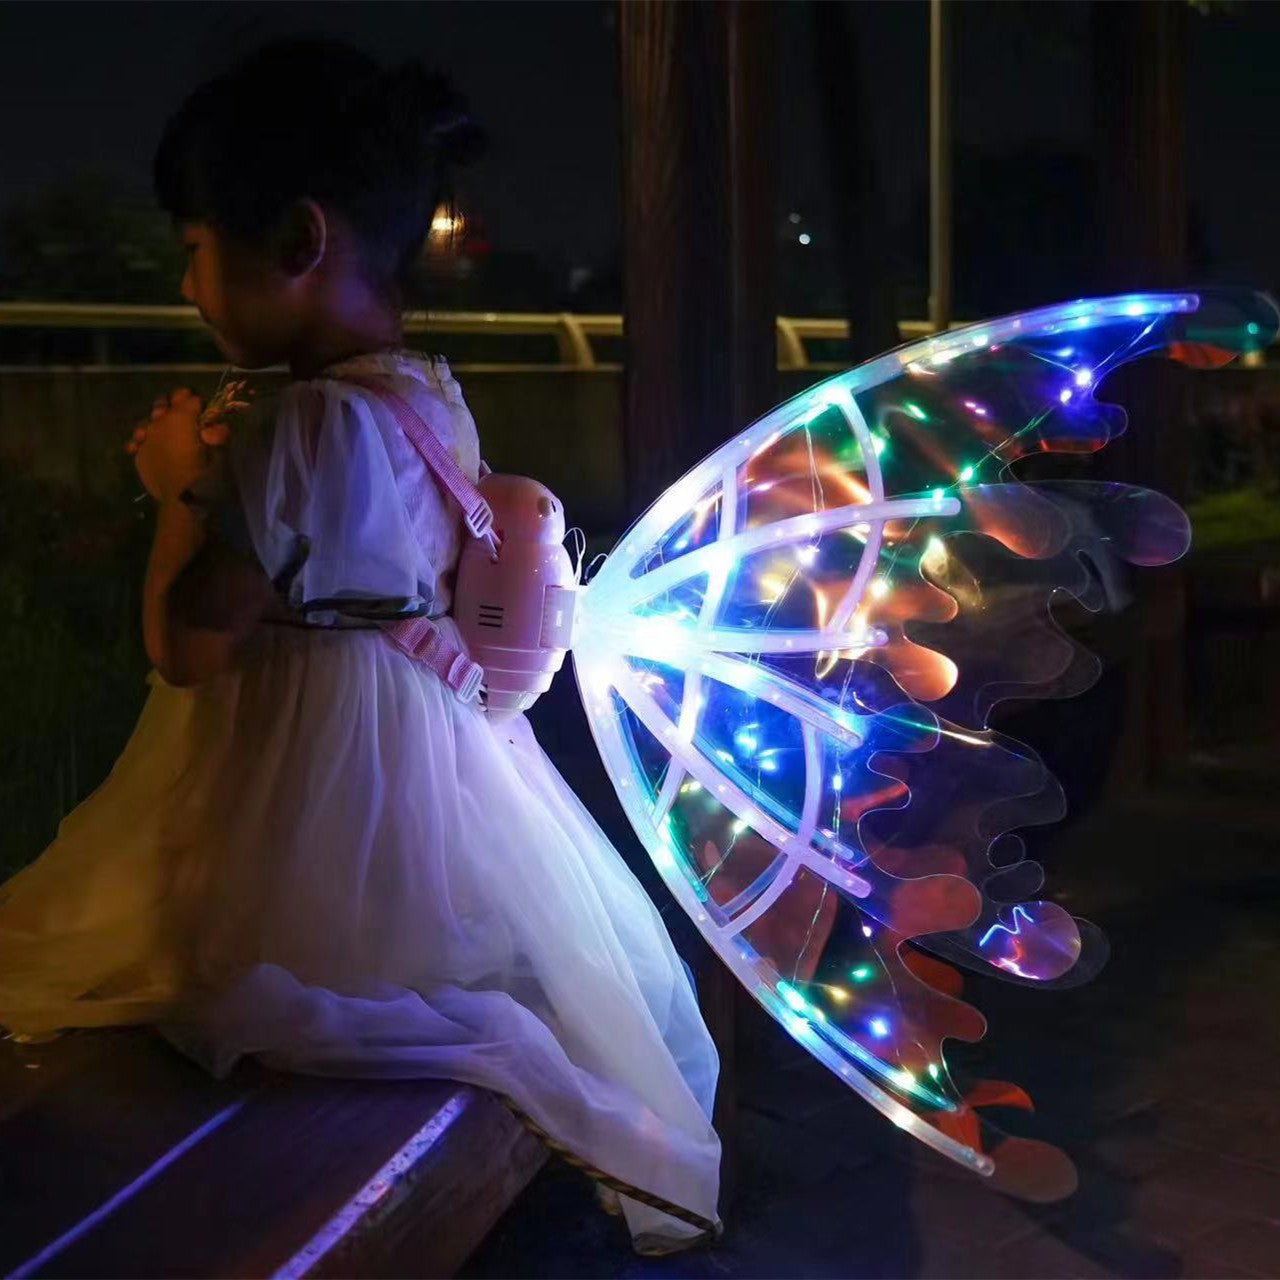 Girls Electrical Butterfly Wings With Lights Glowing Shiny Dress